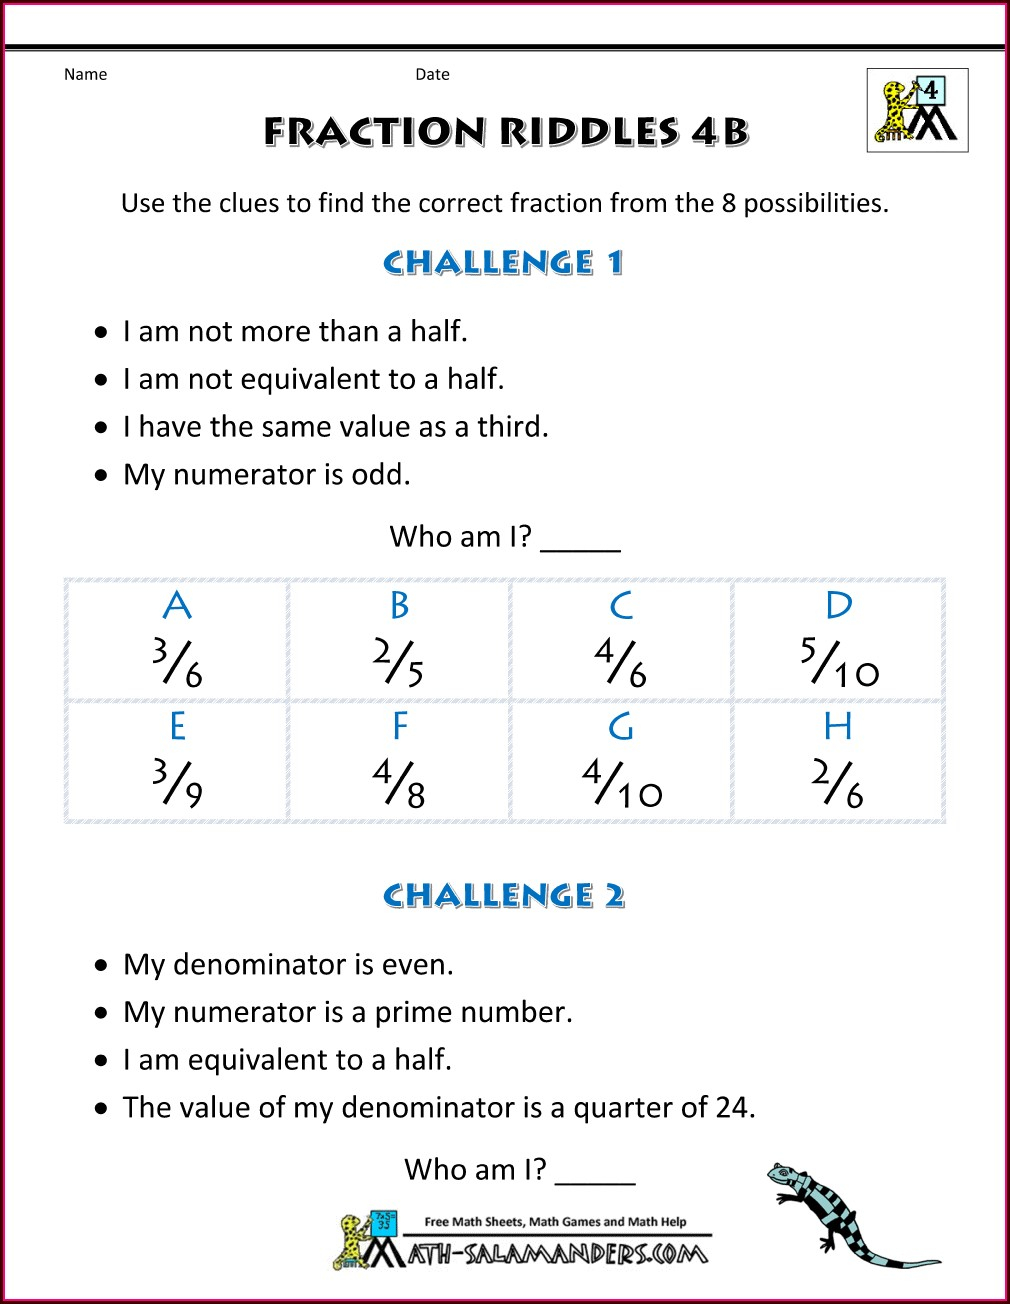 fractions-equivalent-to-whole-numbers-math-tech-connections